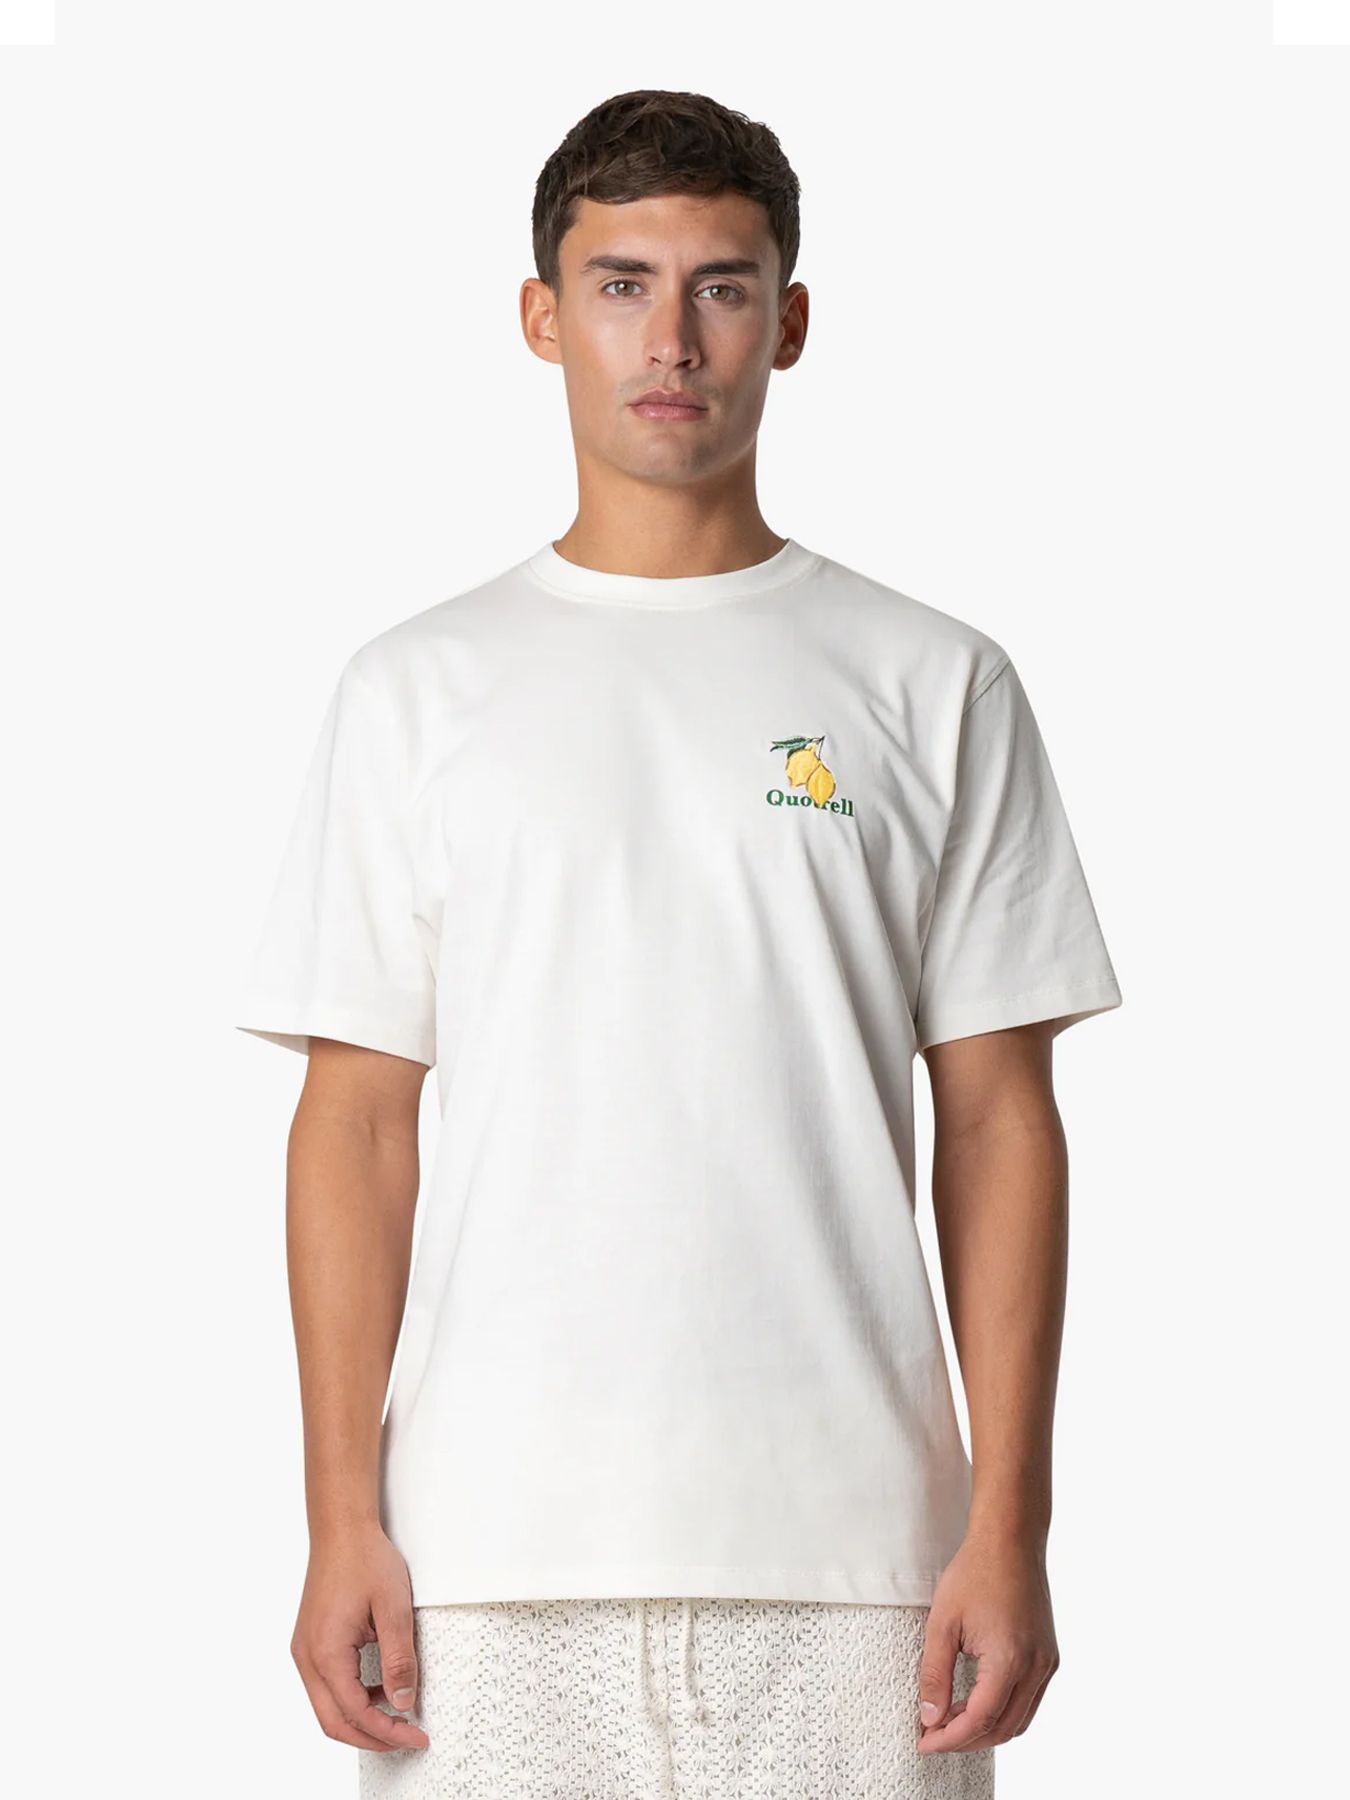 Quotrell Limone t-shirt Off White/green 2900147487079